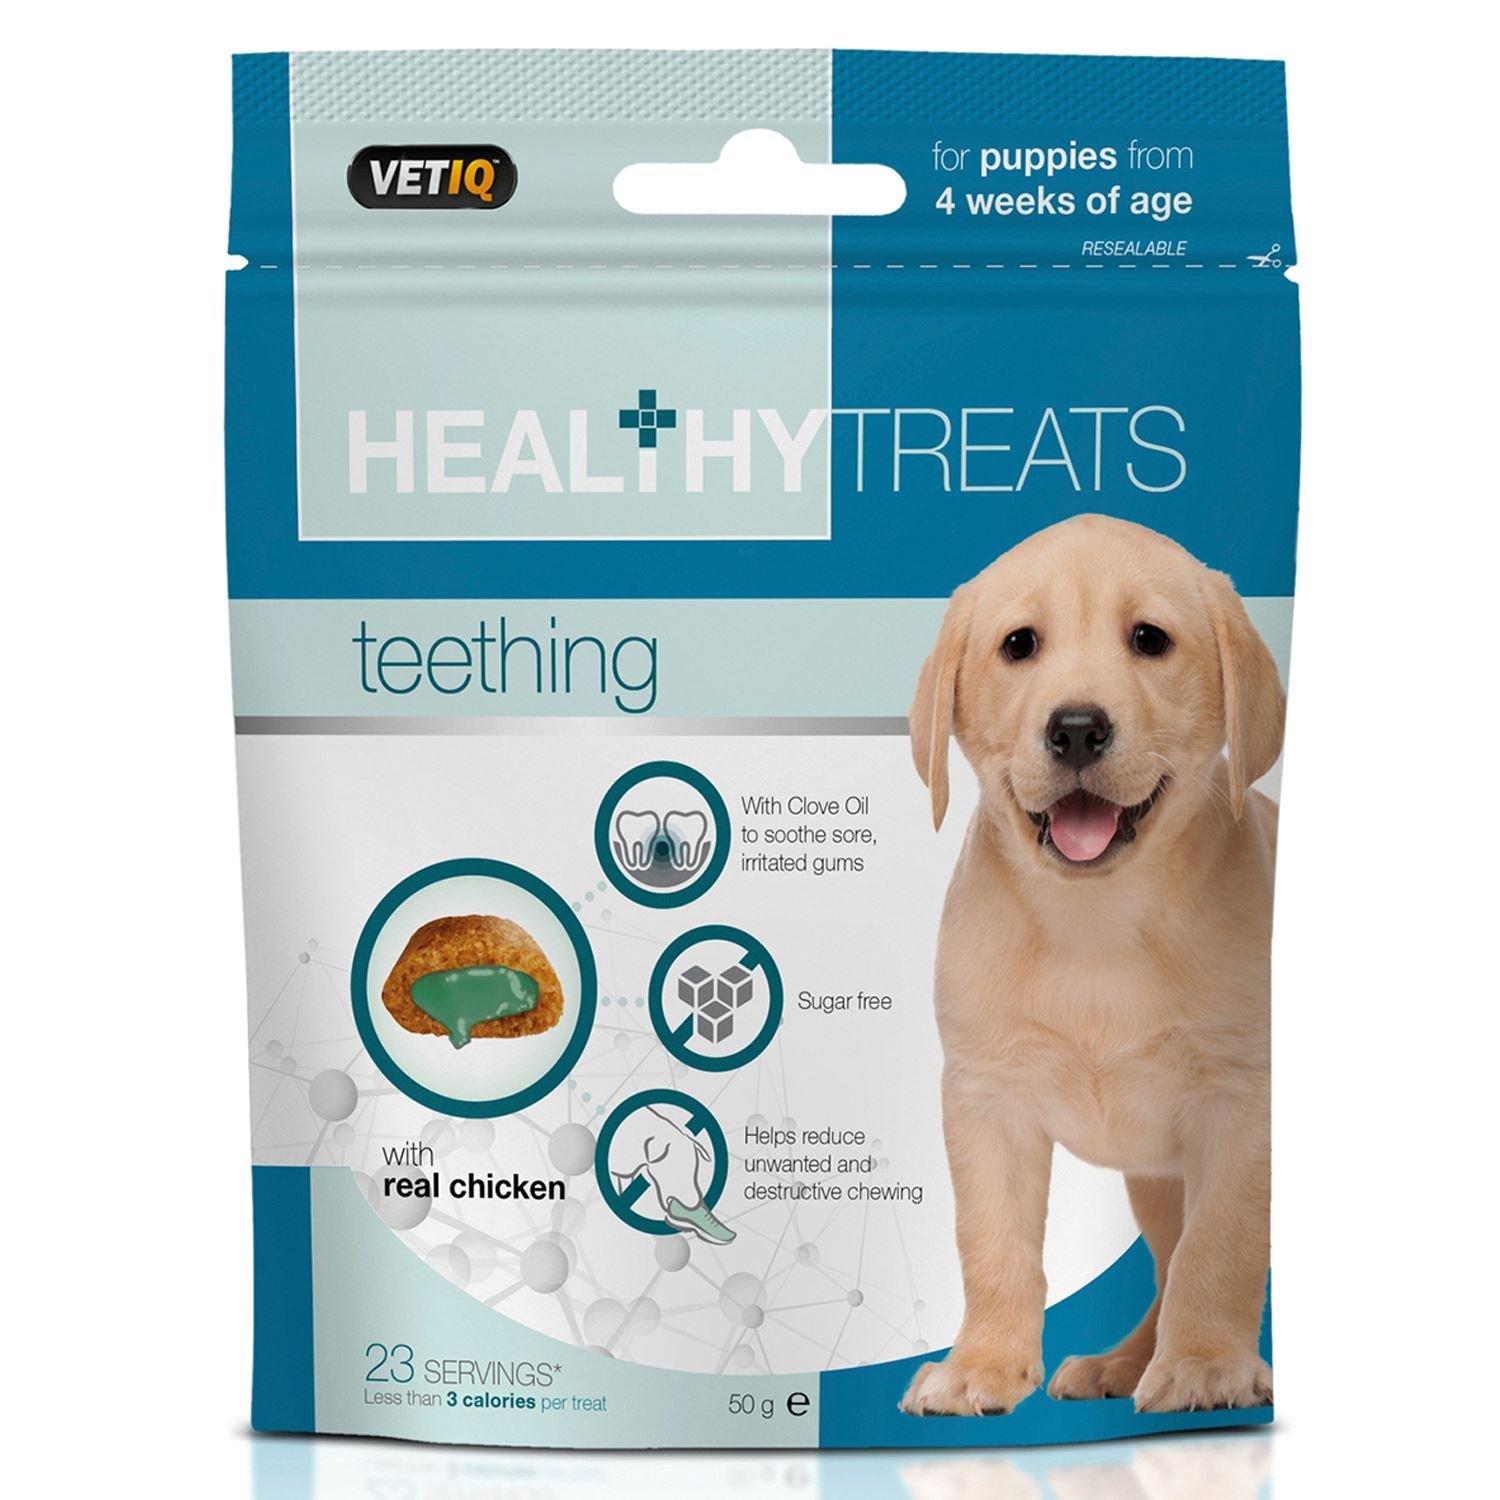 Vetiq Healthy Treats Teething For Puppies - Just Horse Riders